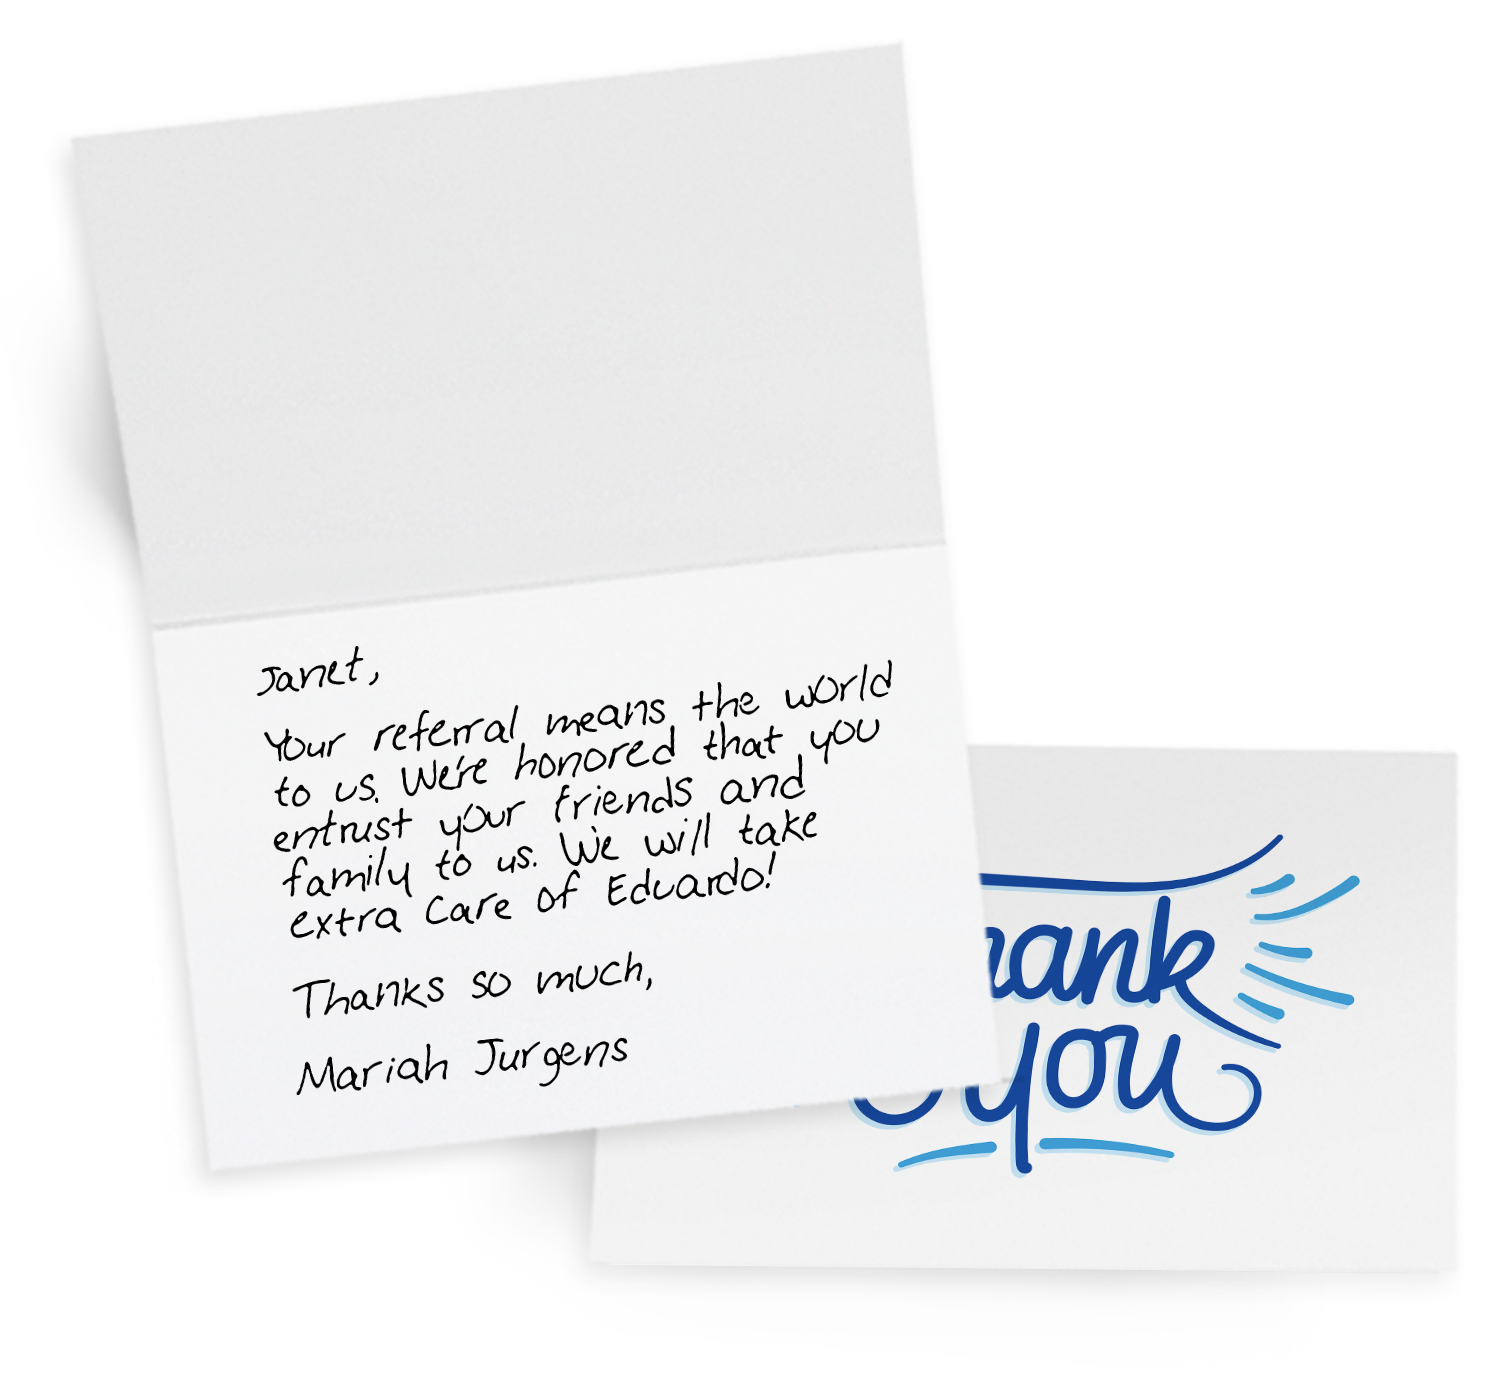 Thank you card example